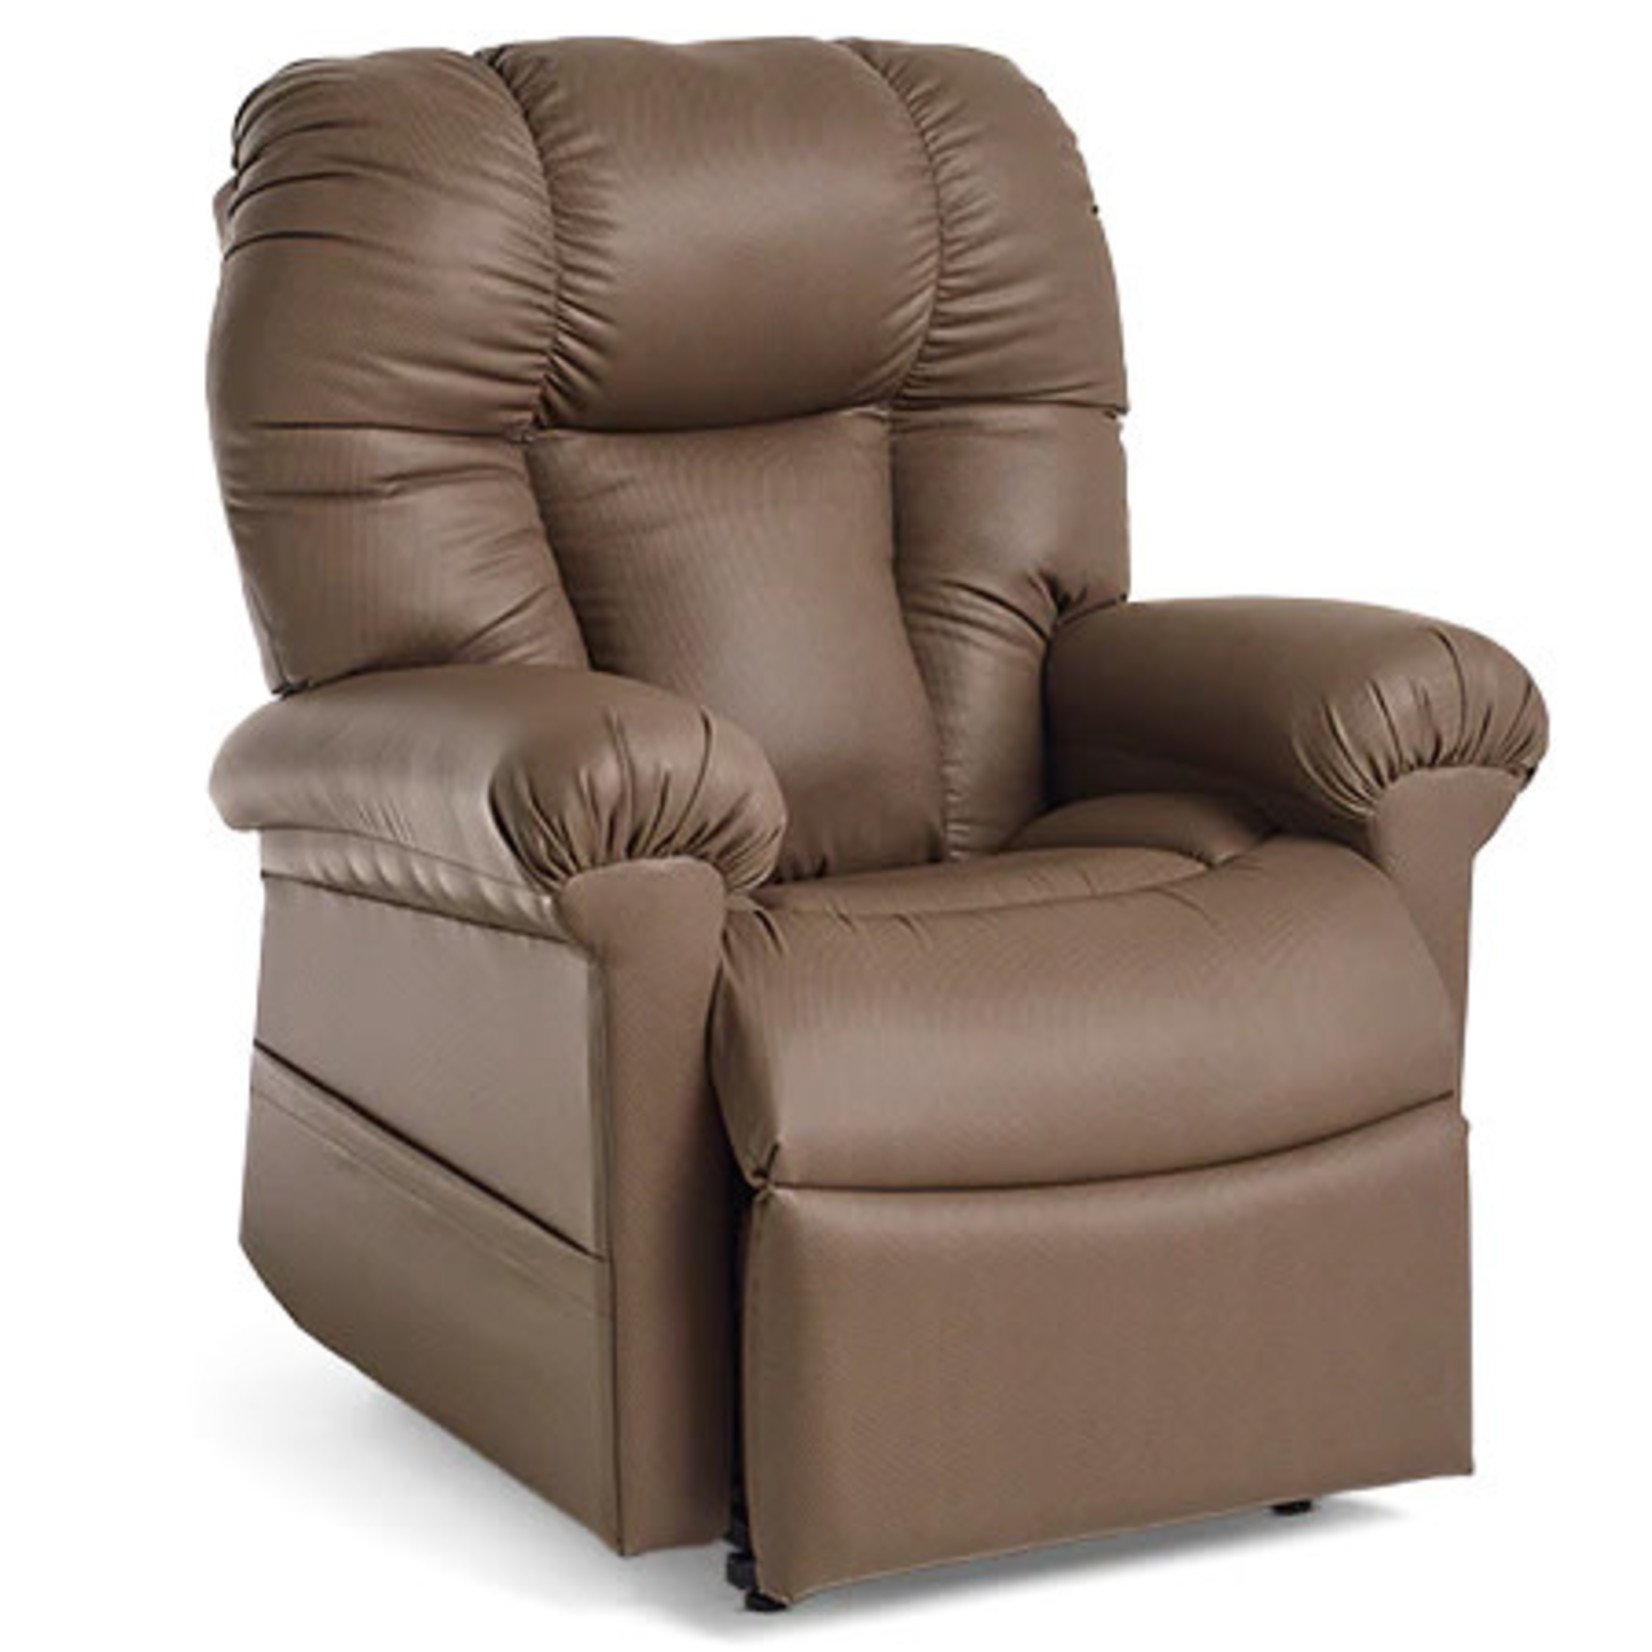 Journey Perfect Sleep Chair Deluxe 5 Zone Infinite Positions - Safeway  Medical Supply